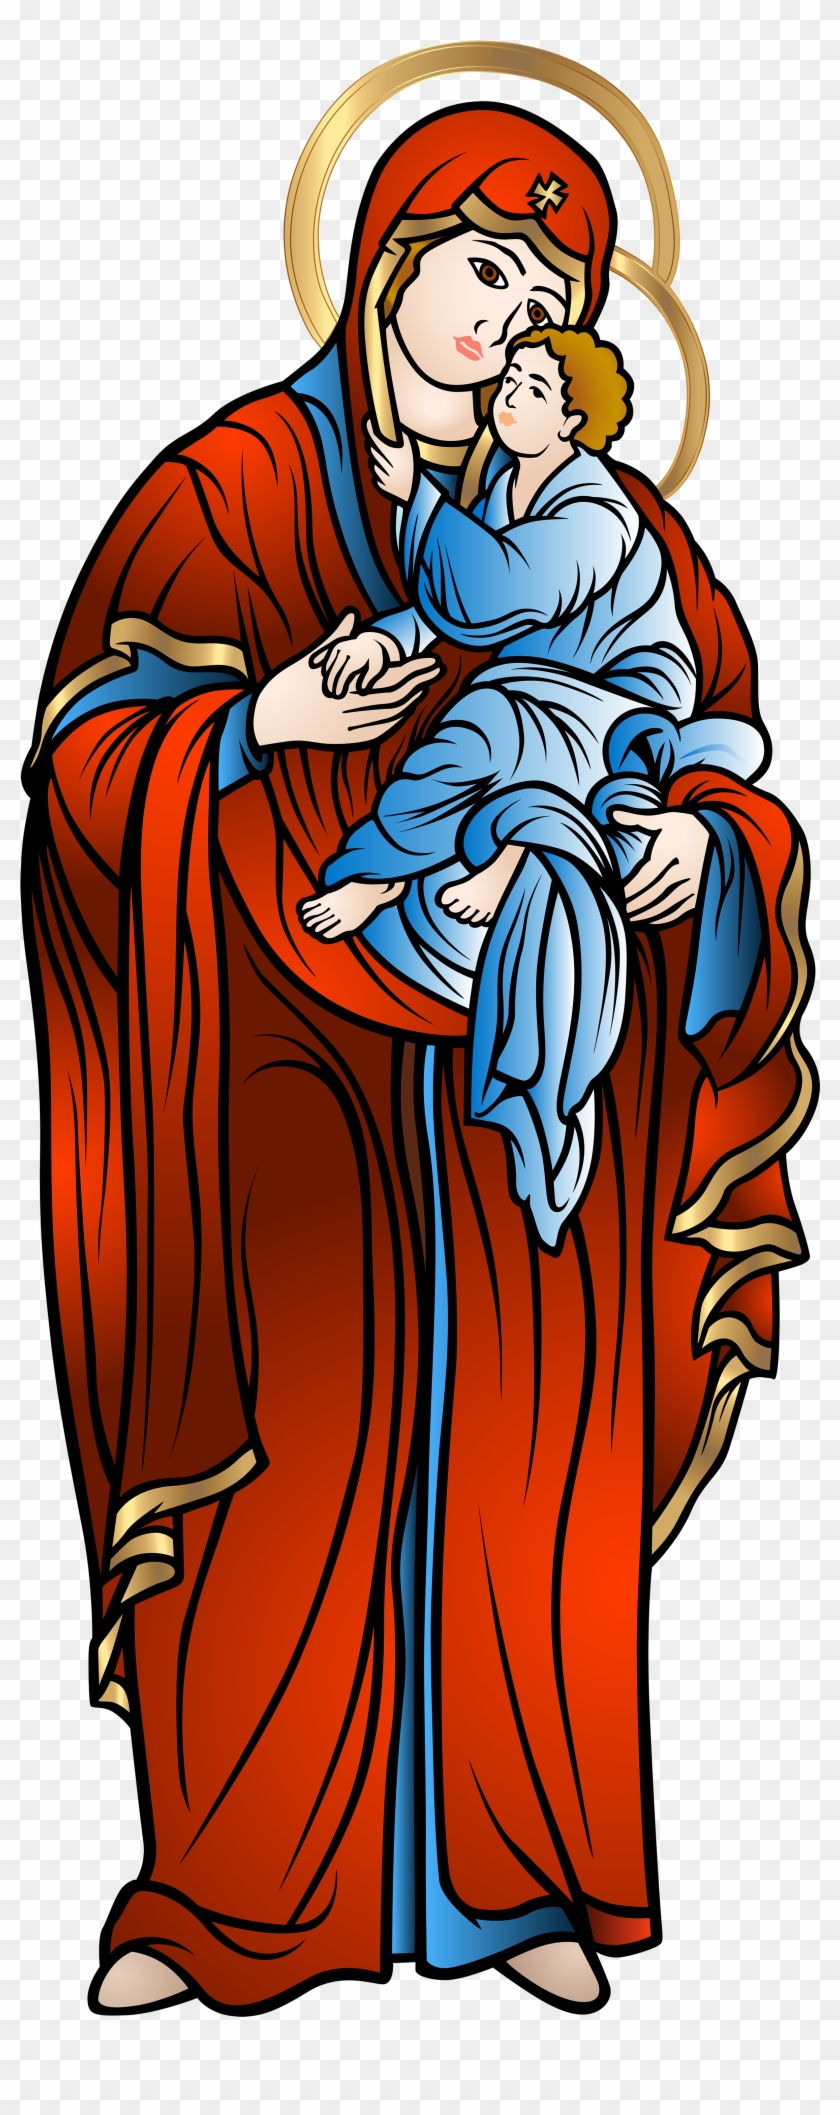 blessed virgin mary with baby jesus virgin mary with jesus clipart hd png download 2514x6000 900435 pngfind blessed virgin mary with baby jesus